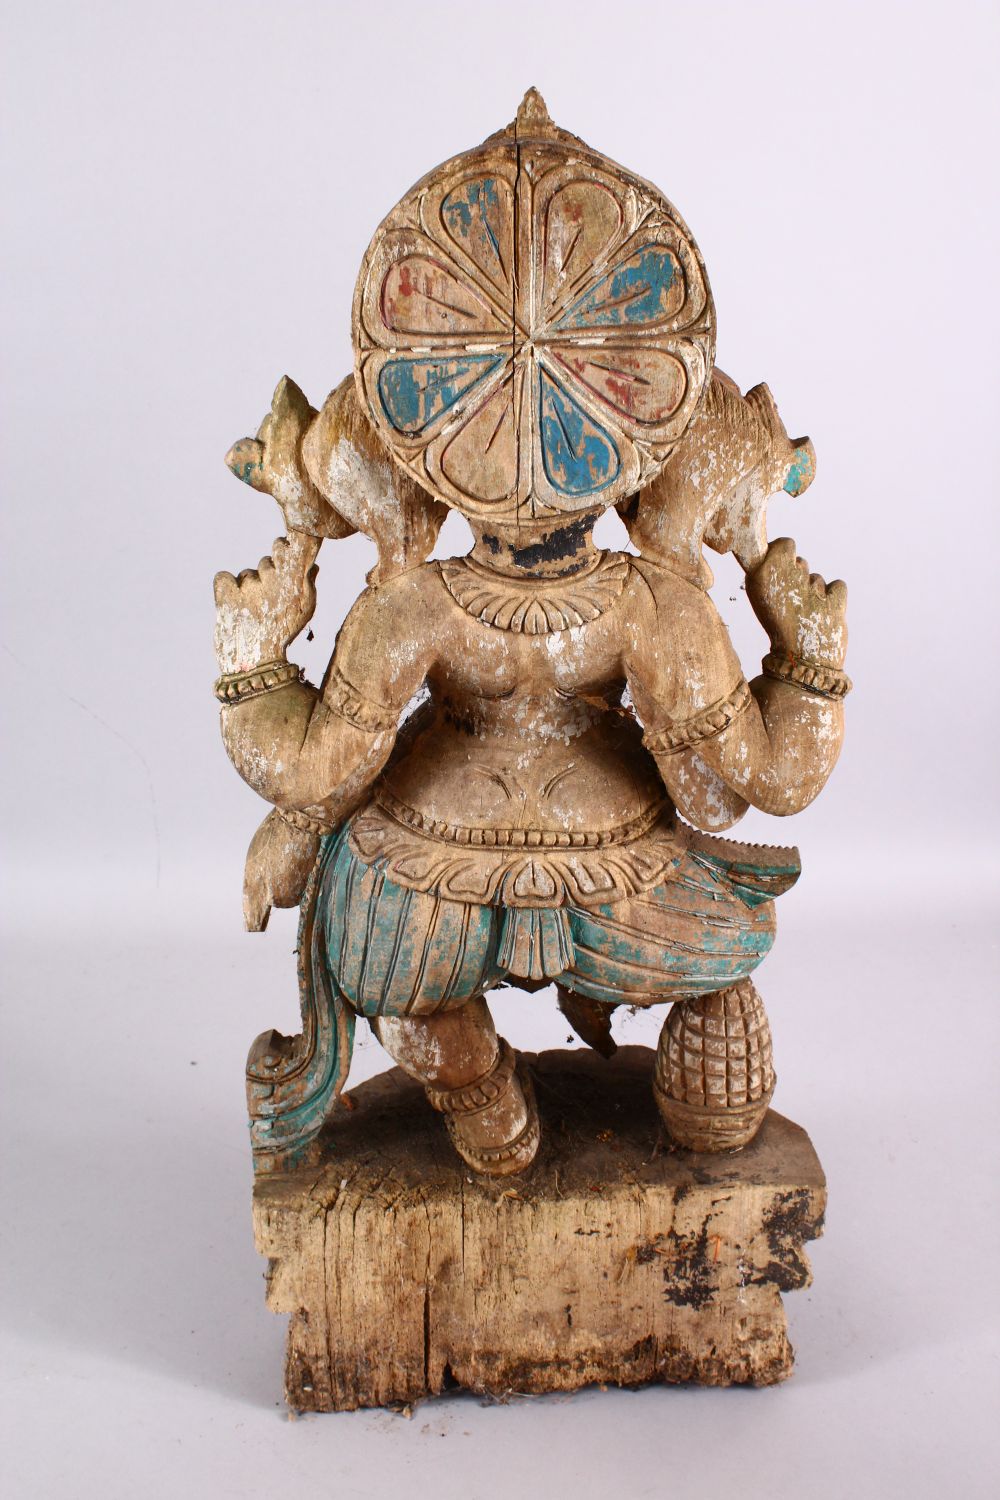 AN 19TH / 20TH CENTURY INDIAN CARVED FIGURE OF GANESH / DEITY - 59cm high - Image 3 of 3